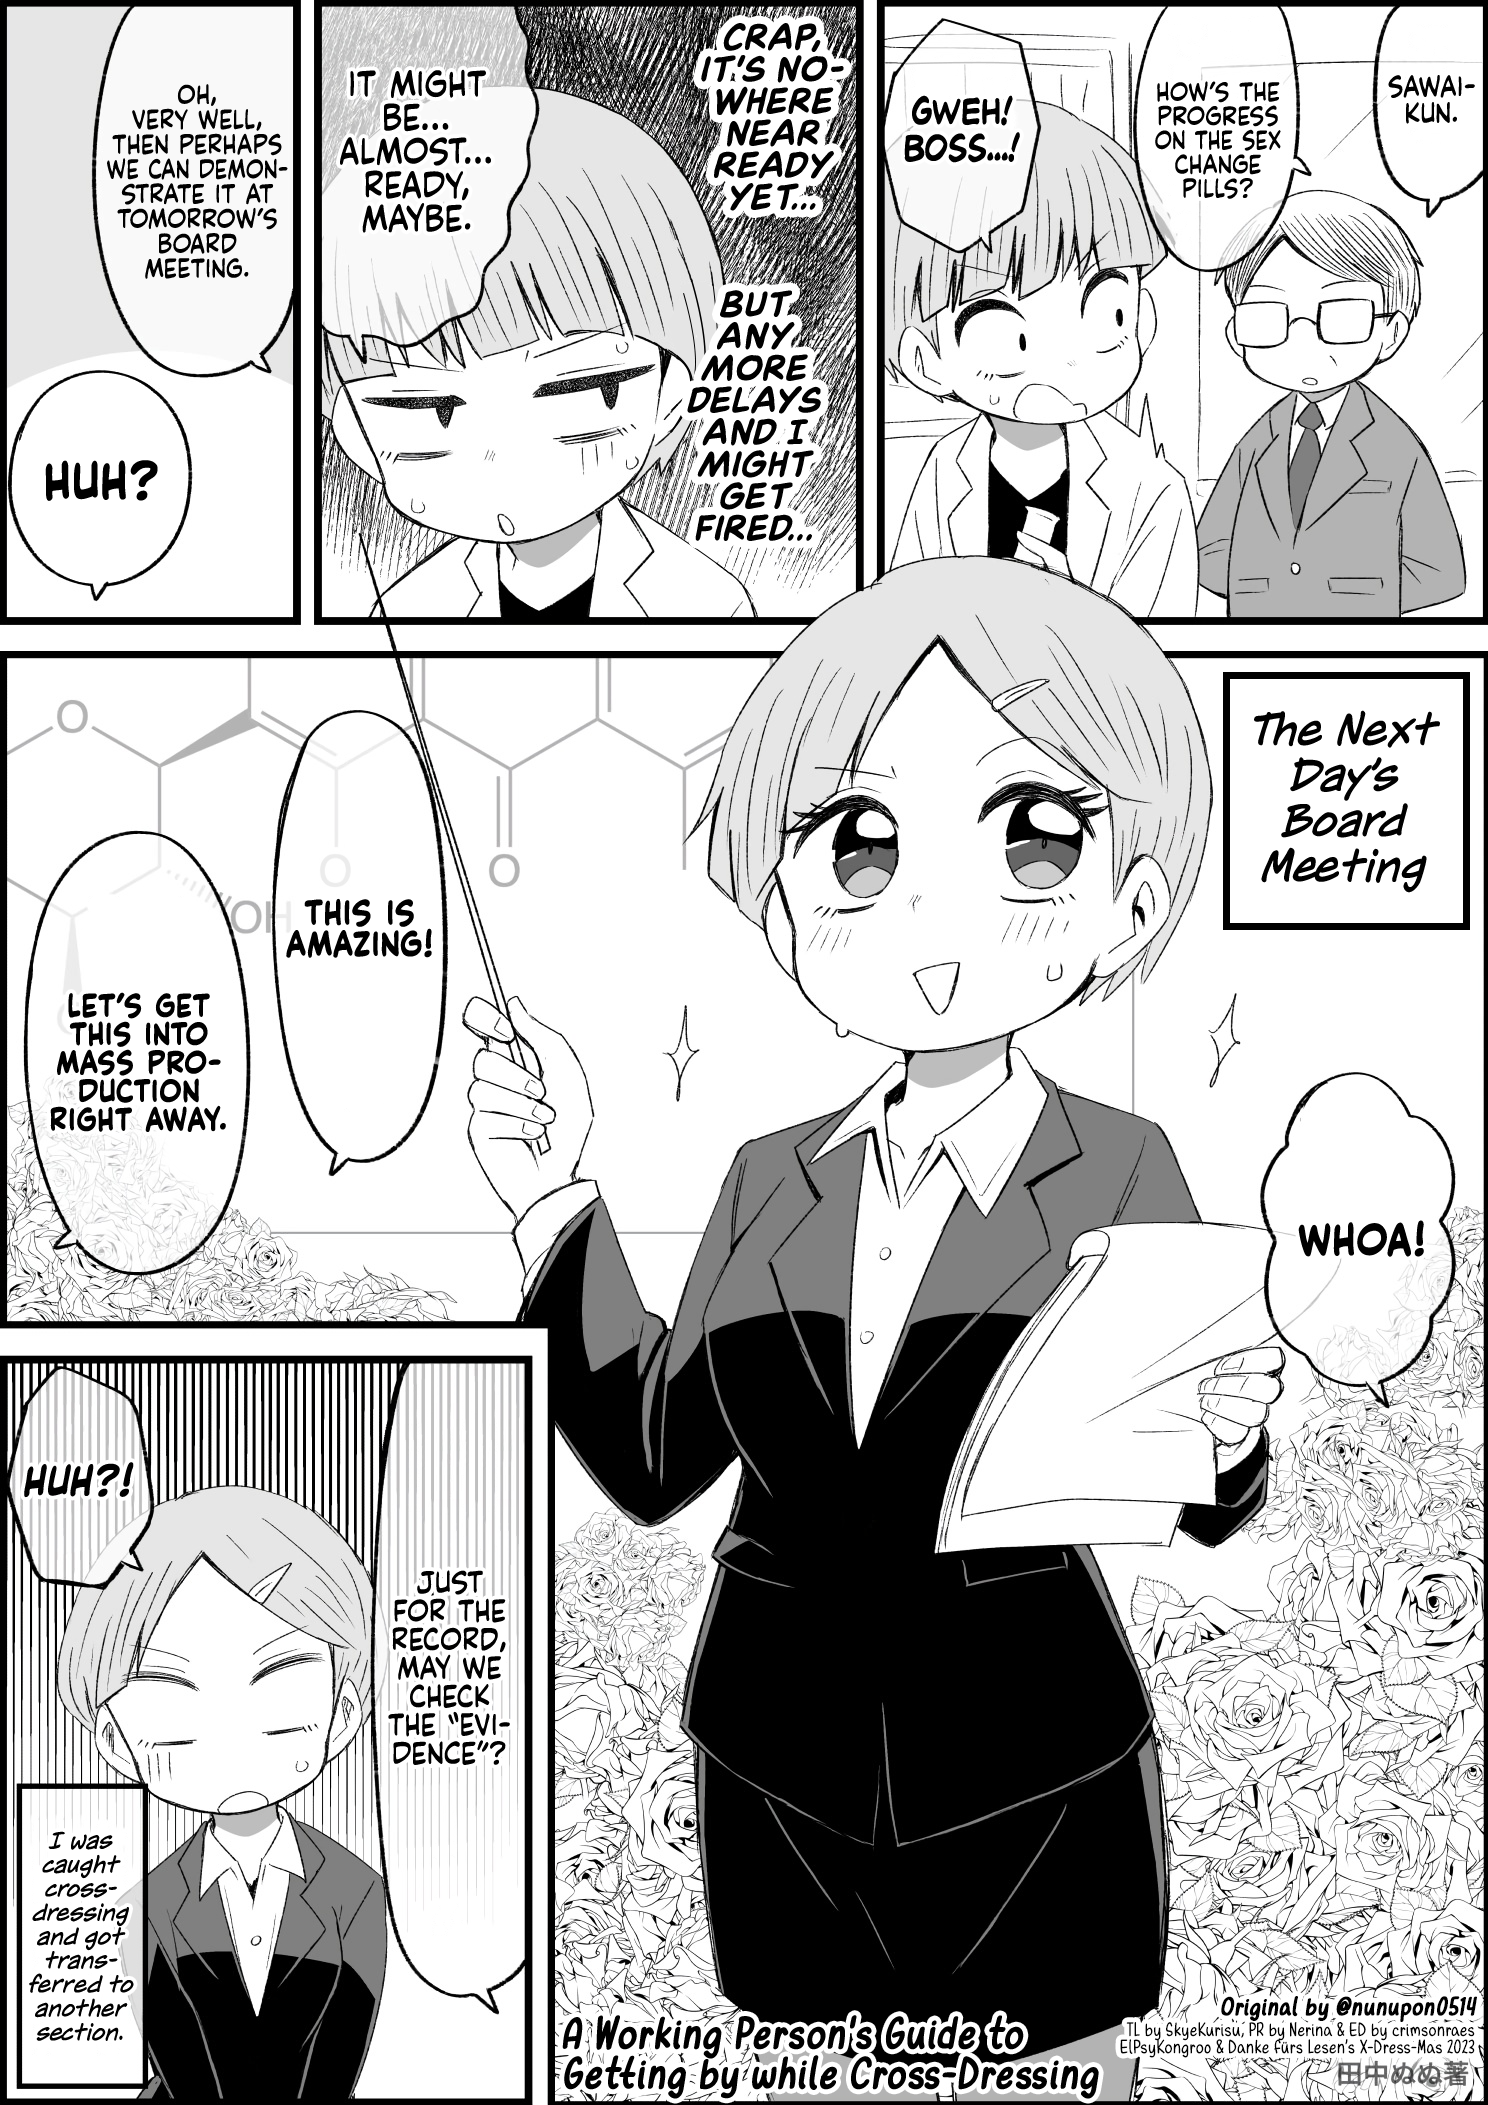 A Working Person's Guide to Getting by while Cross-Dressing manga